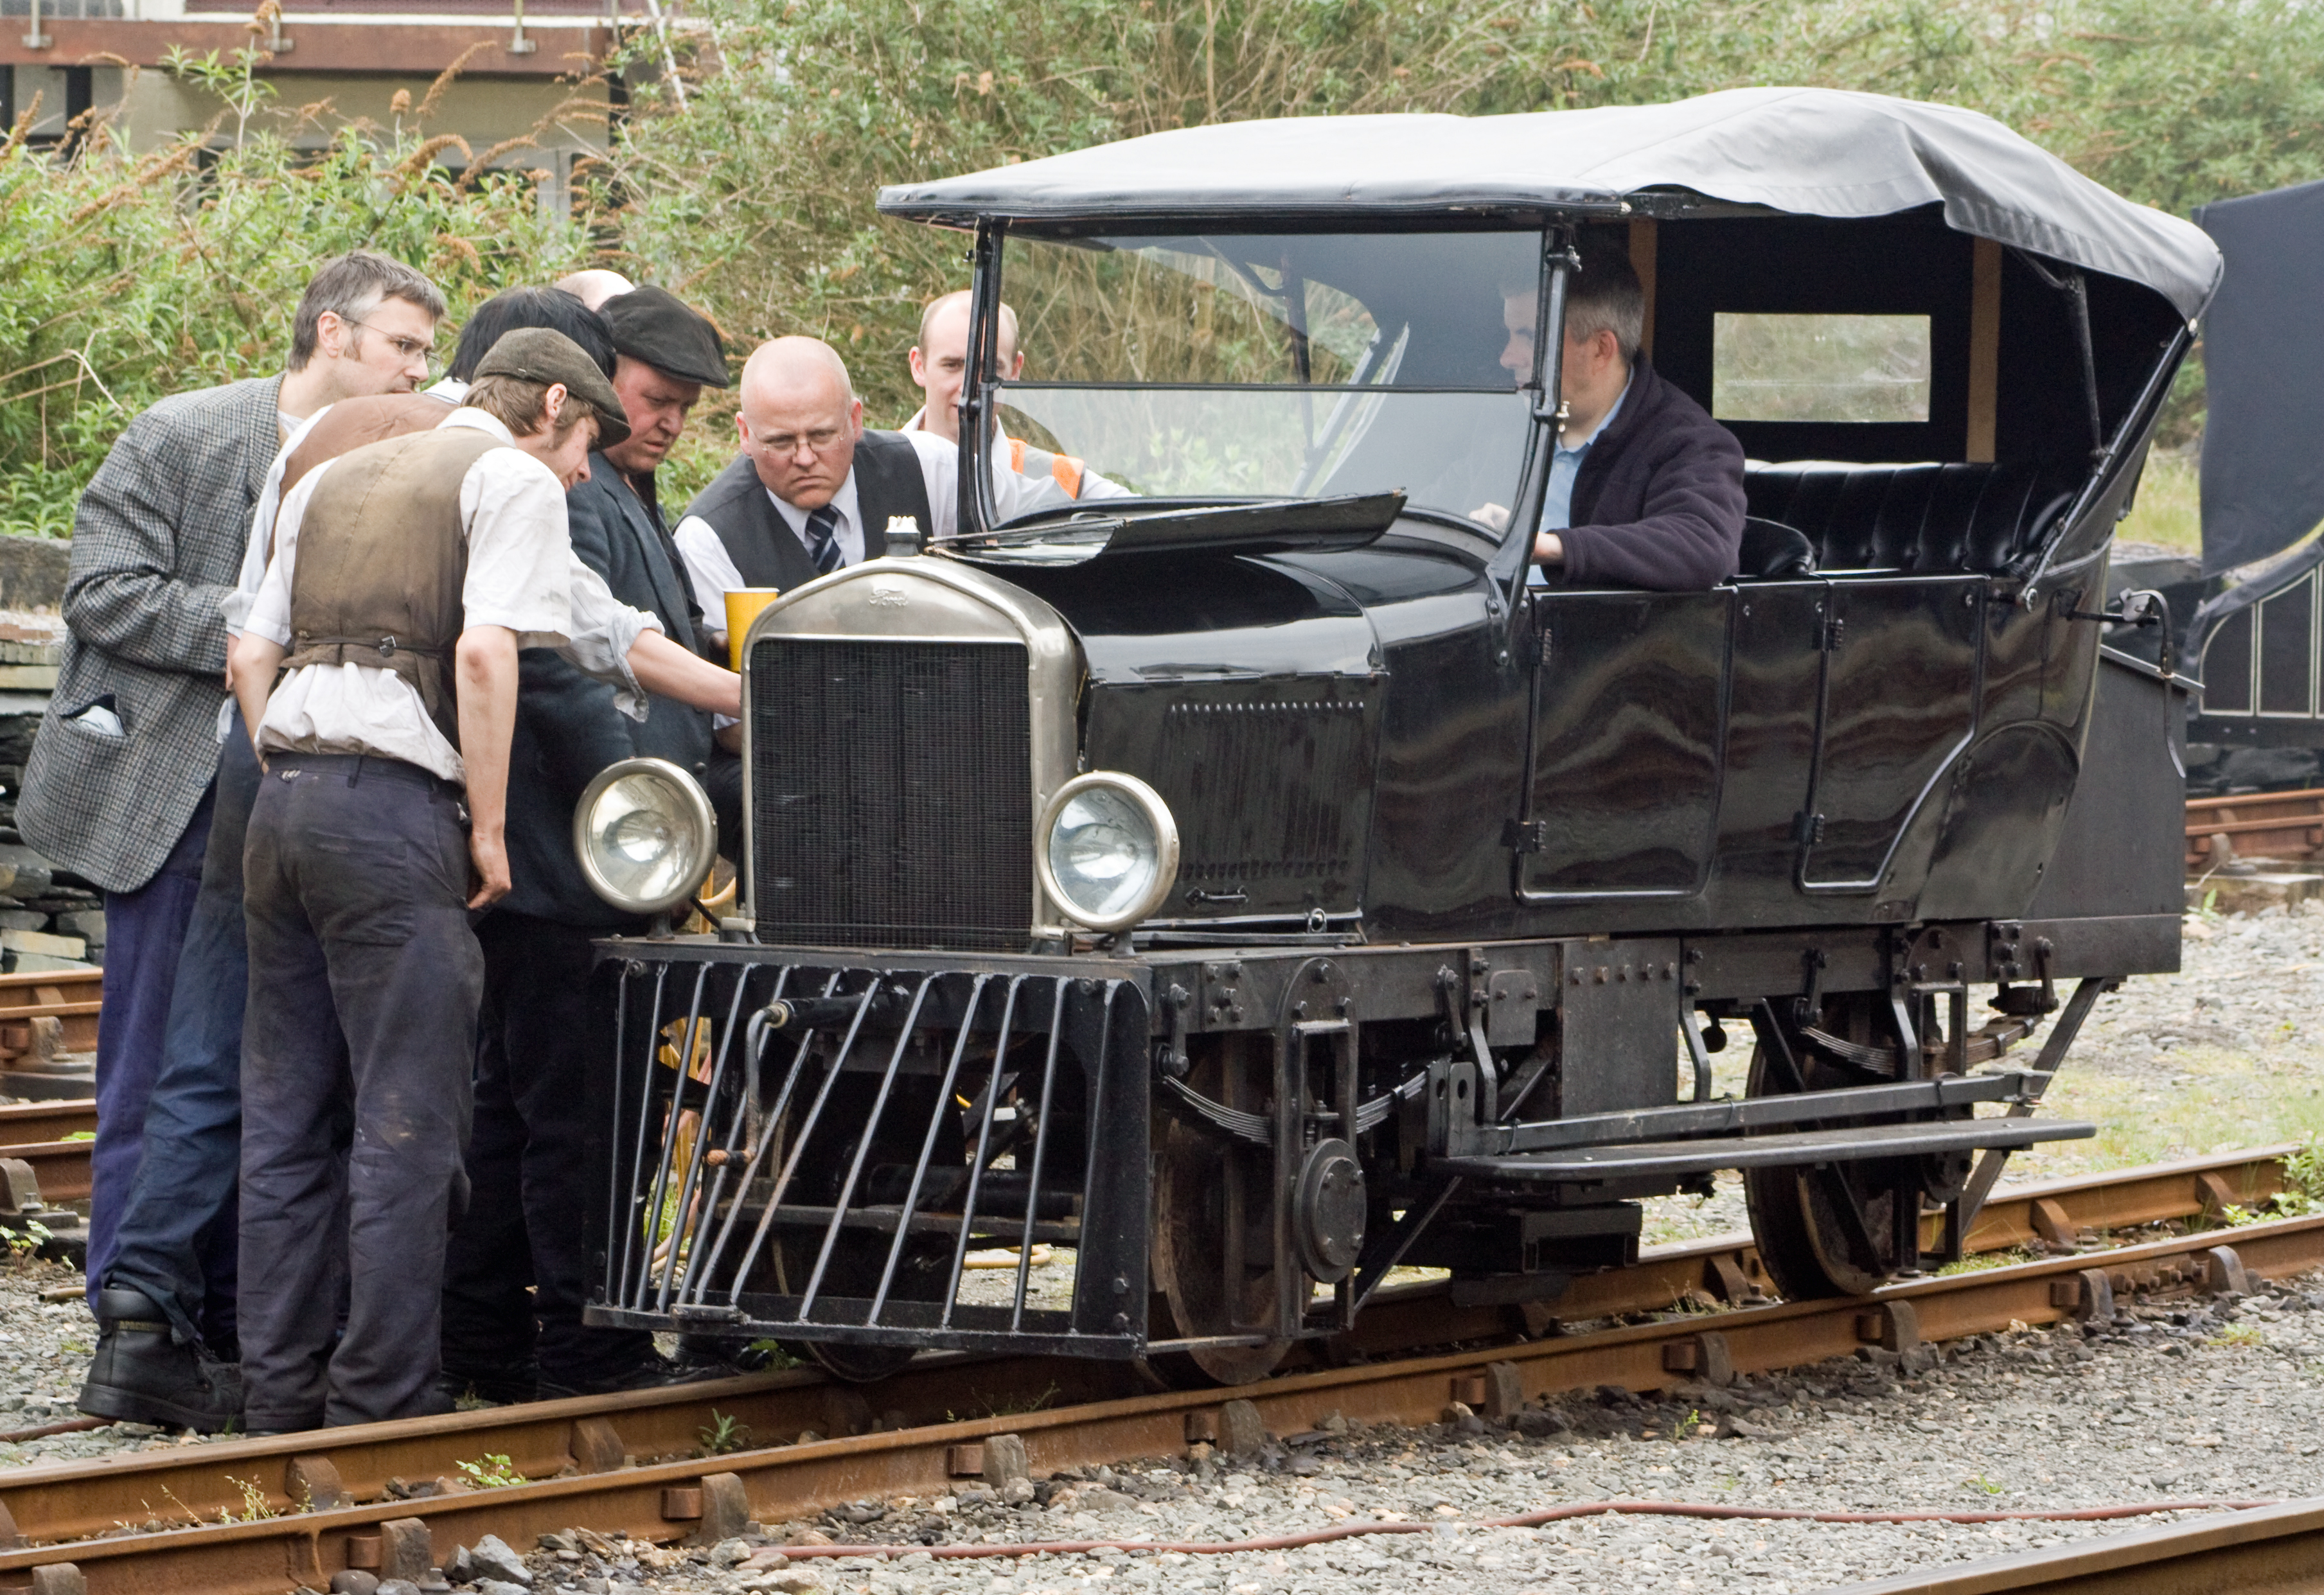 Rail-mounted Model T Ford